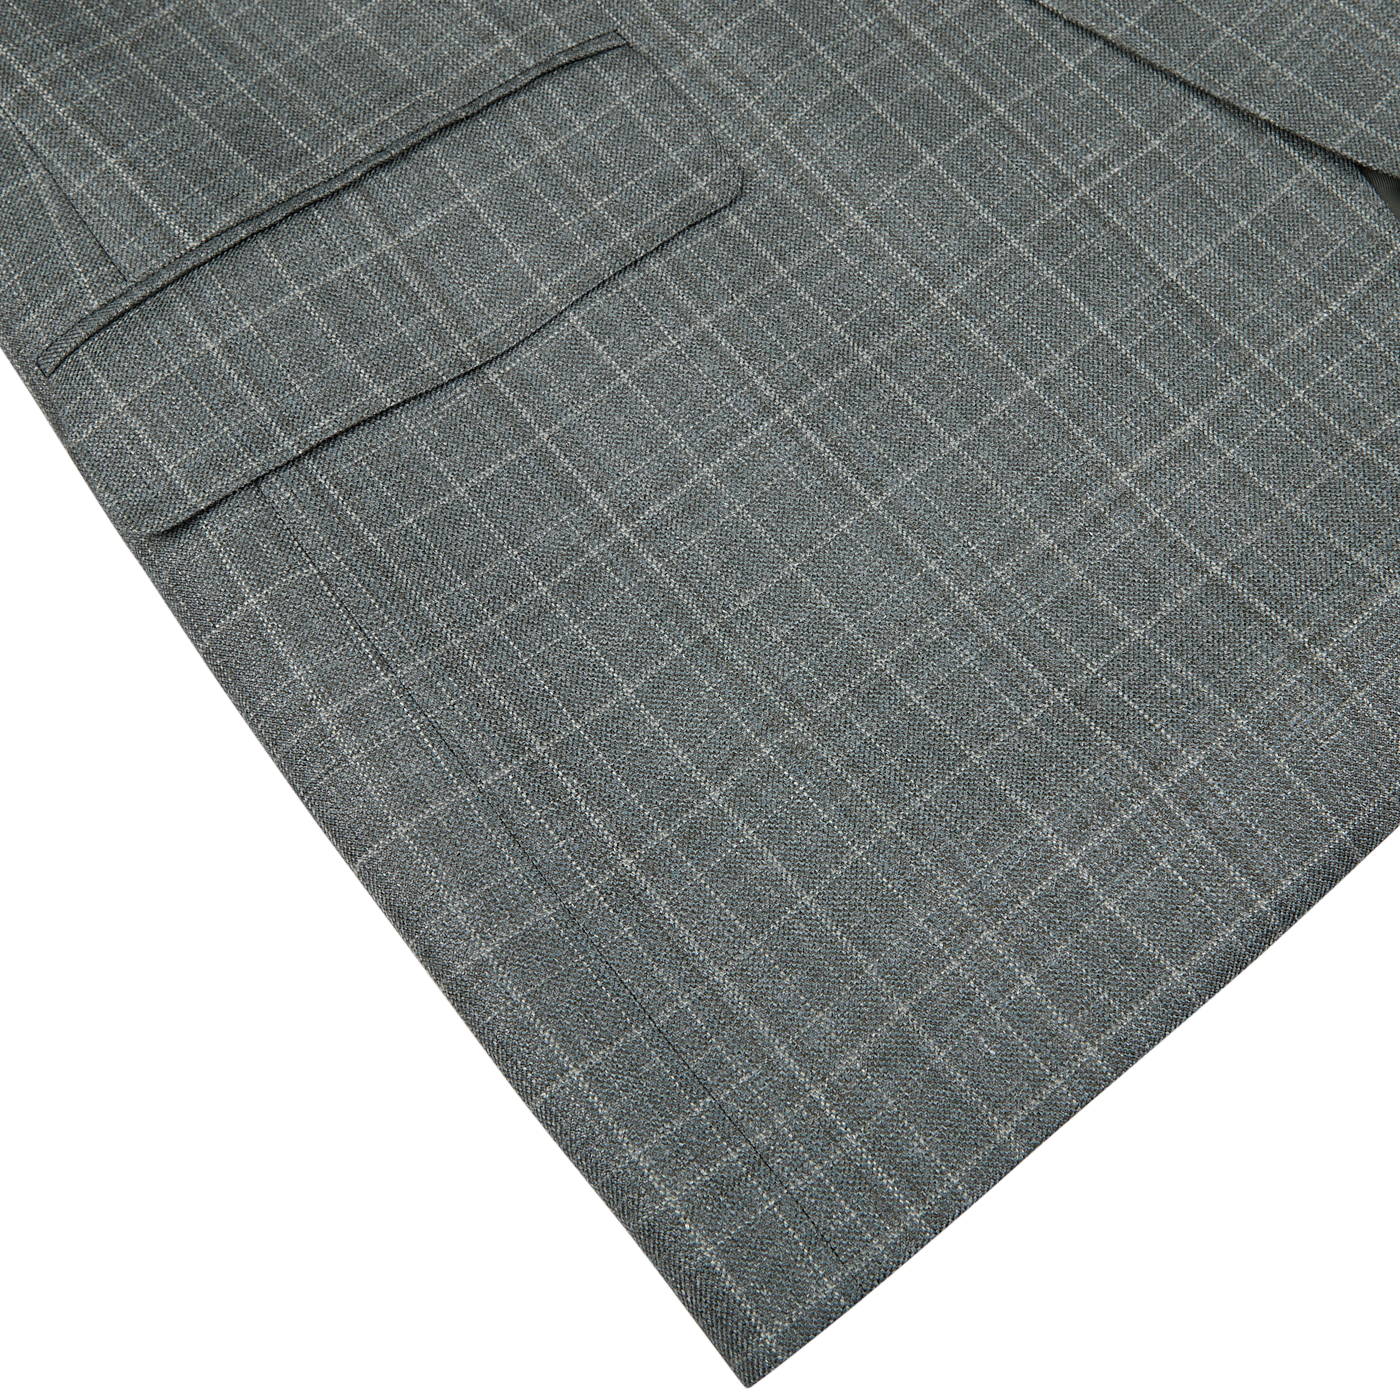 Close-up of a Canali Green Checked Wool Silk Linen Blazer with visible texture and pockets, laid out on a white background.